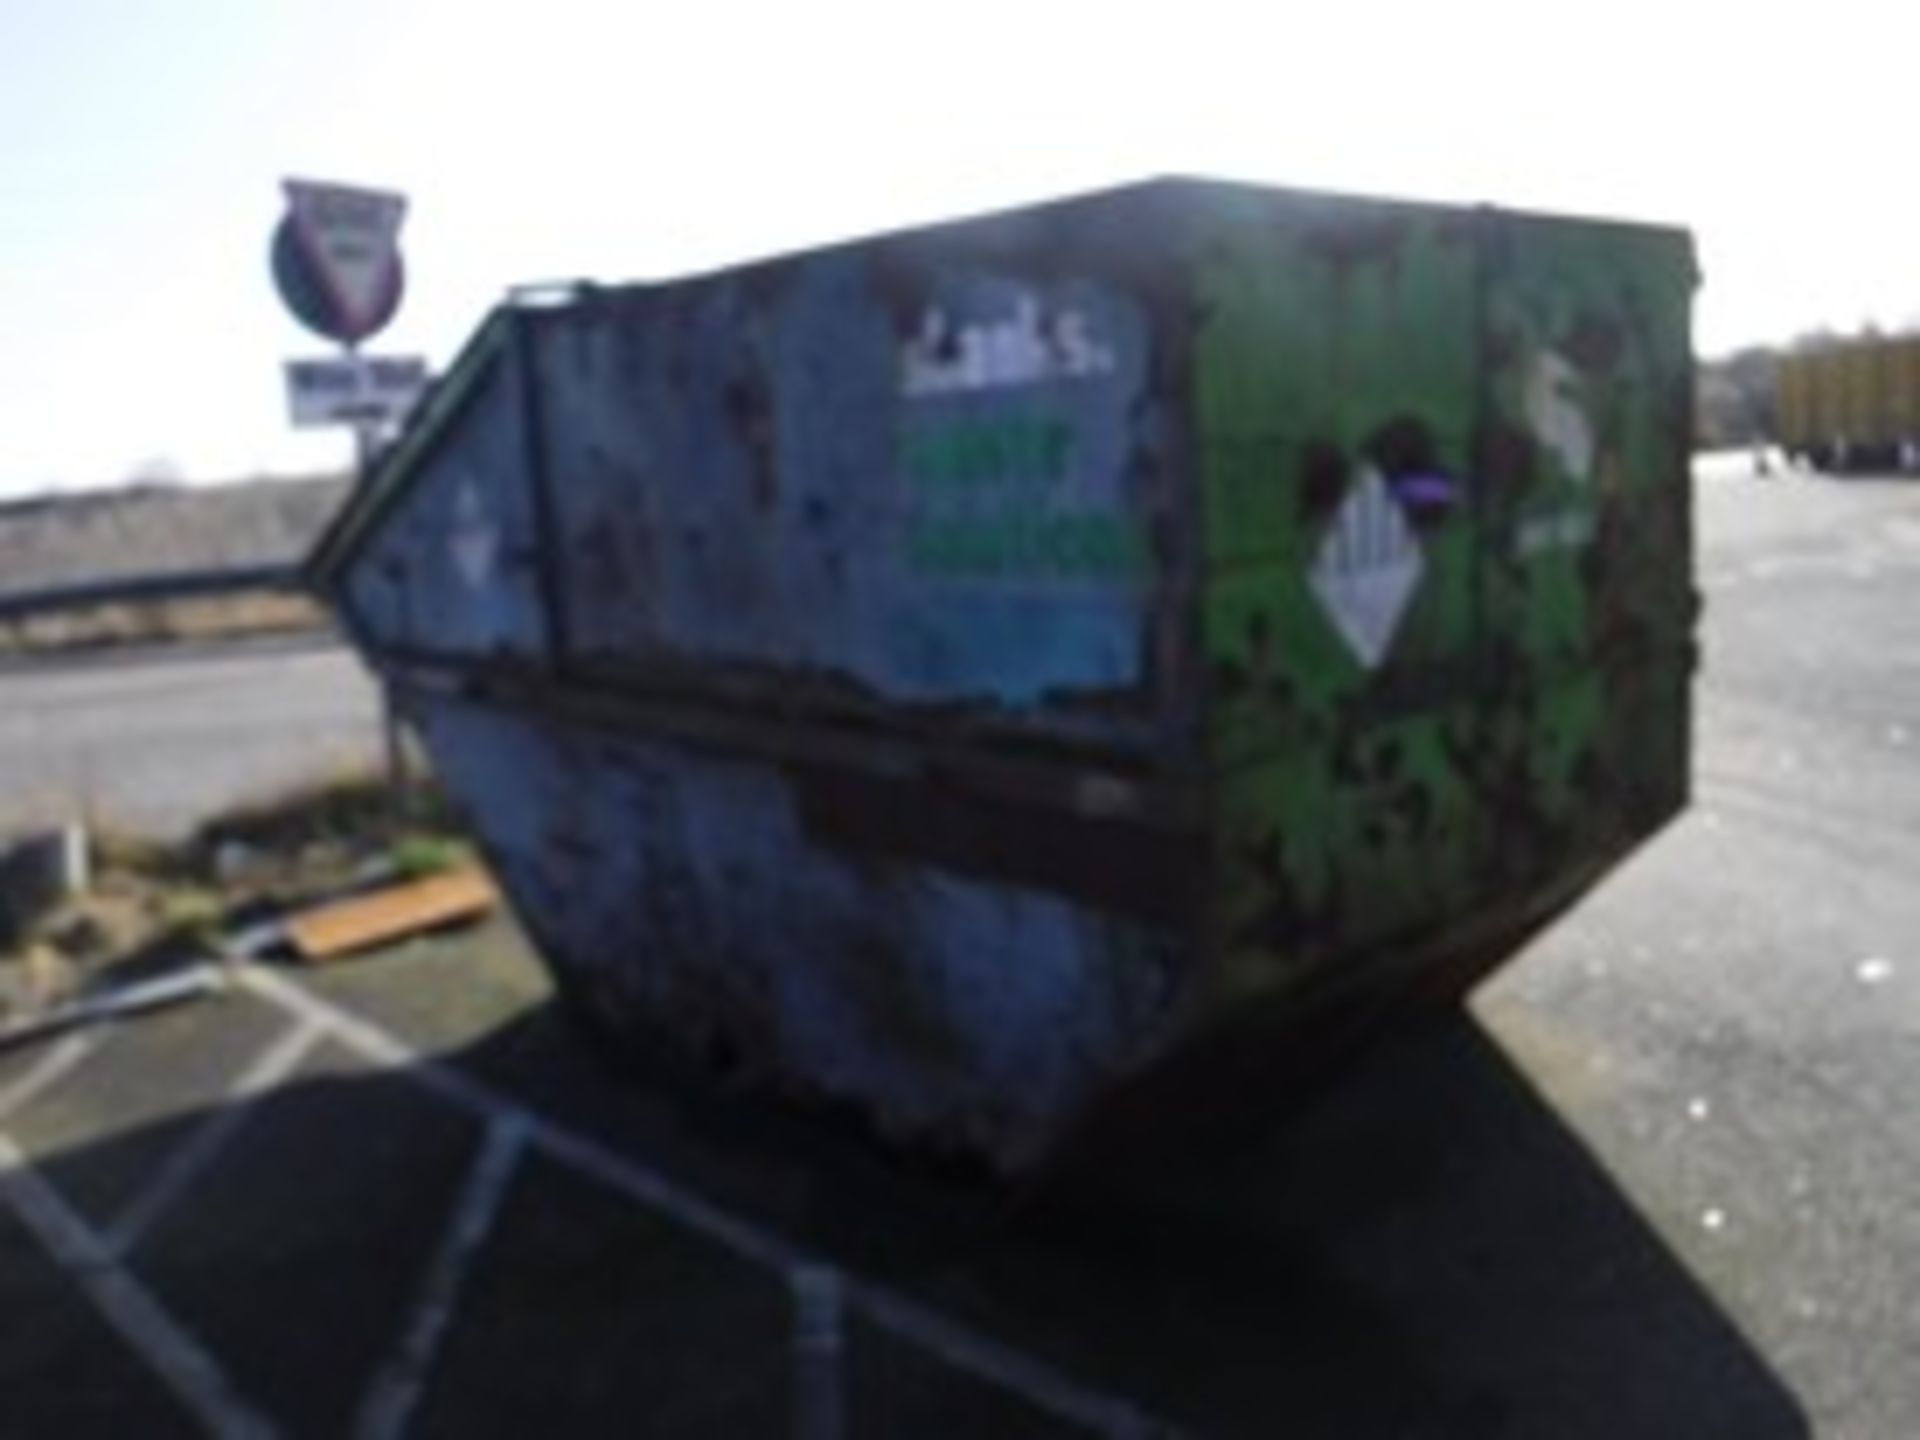 CLOSED SKIP. VIDEO OF ALL SKIPS CAN BE EMAILED TO YOU BY CONTACTING JONNY.BELL@MORRISLESLIE.CO.UK. V - Bild 2 aus 2